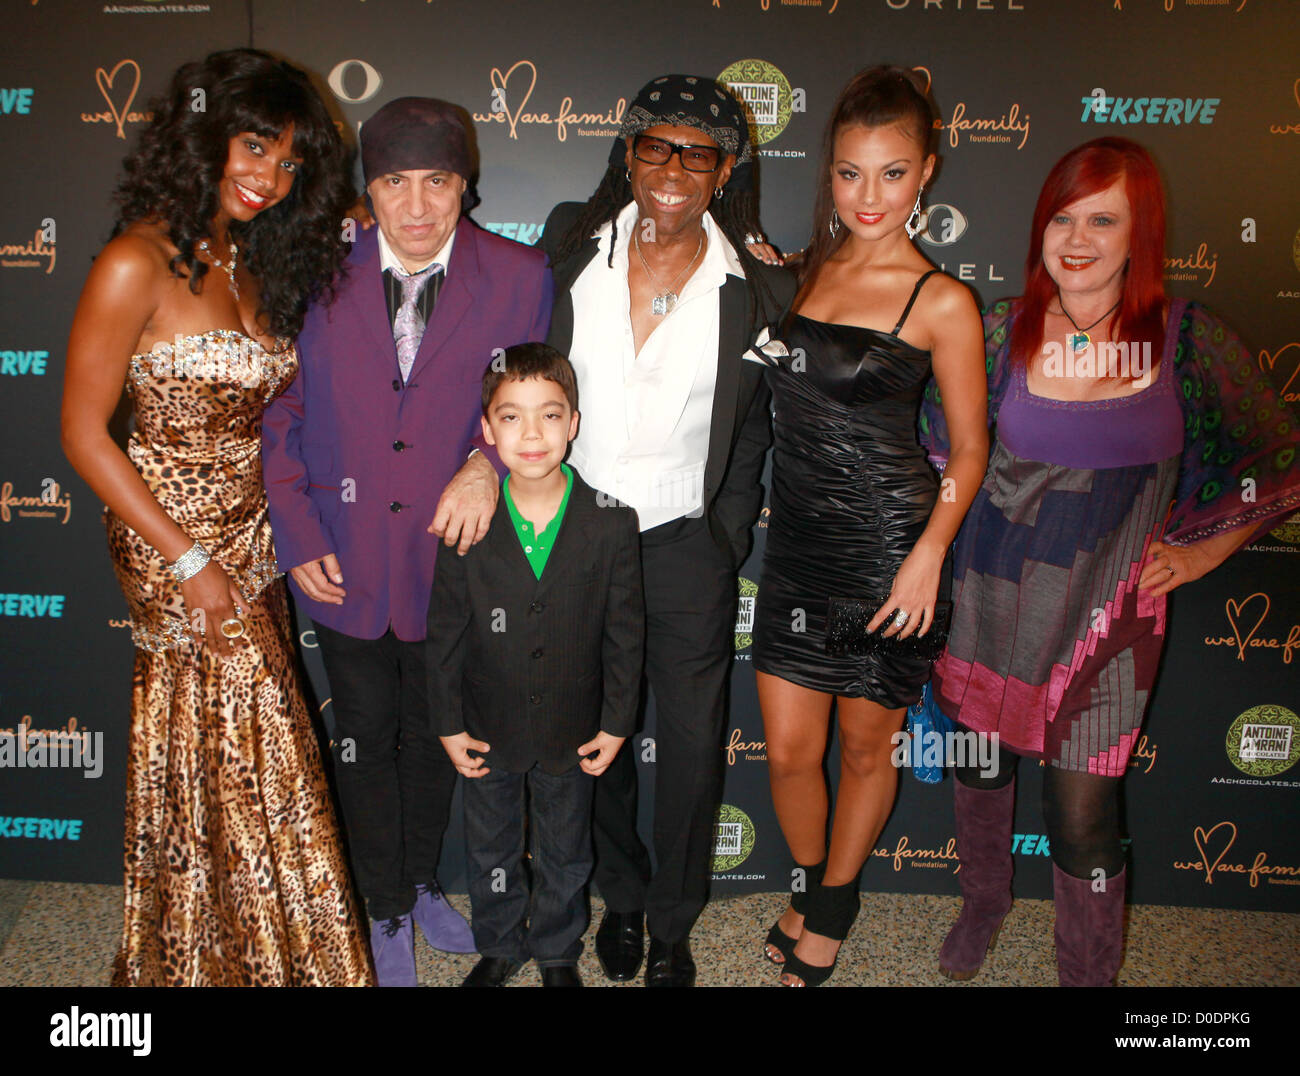 Guests, Steven Van Zandt, Ethan Borthnick, Nile Rogers, Melissa Jimenez,  Kate Pierson at the We Are Family 8th Annual Stock Photo - Alamy